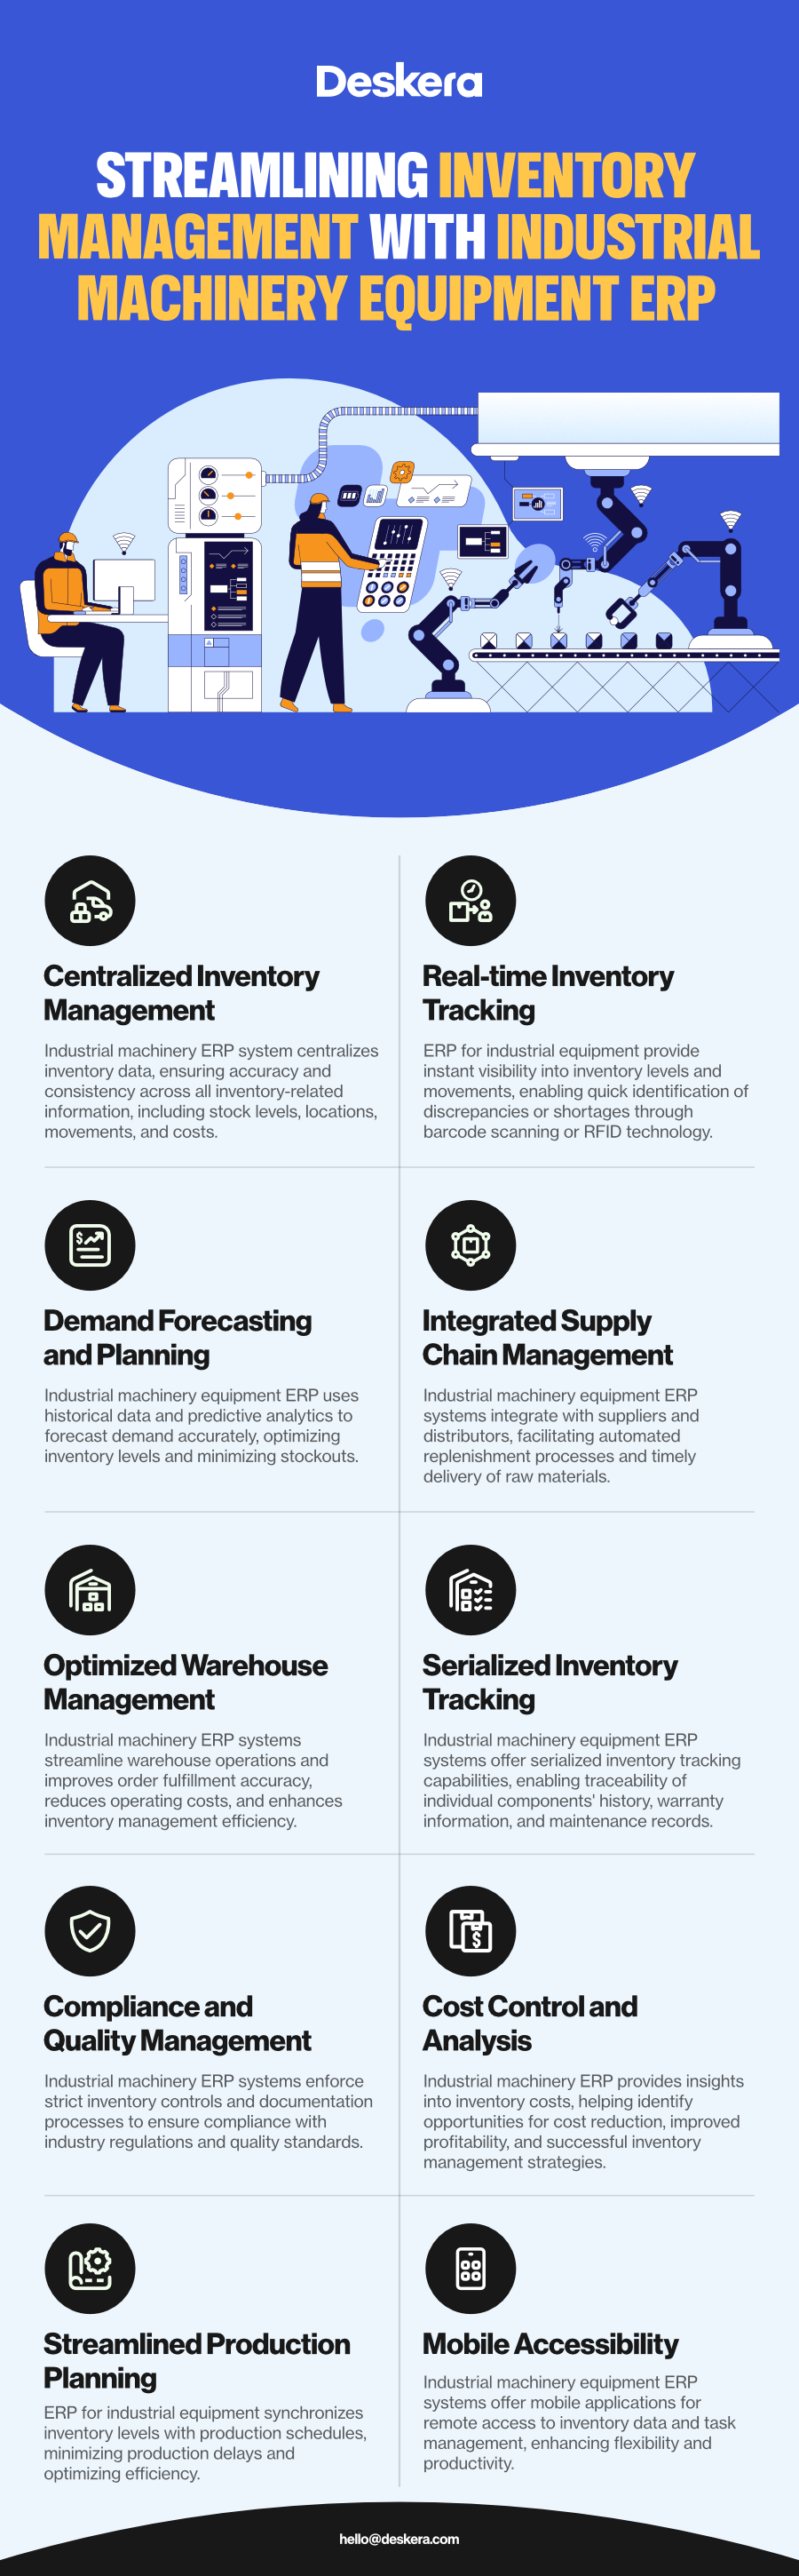 Industrial machinery ERP helps in streamlining inventory management through streamlined production planning, mobile accessibility, cost control and analysis, centralized inventory management, real-time inventory tracking, and more.